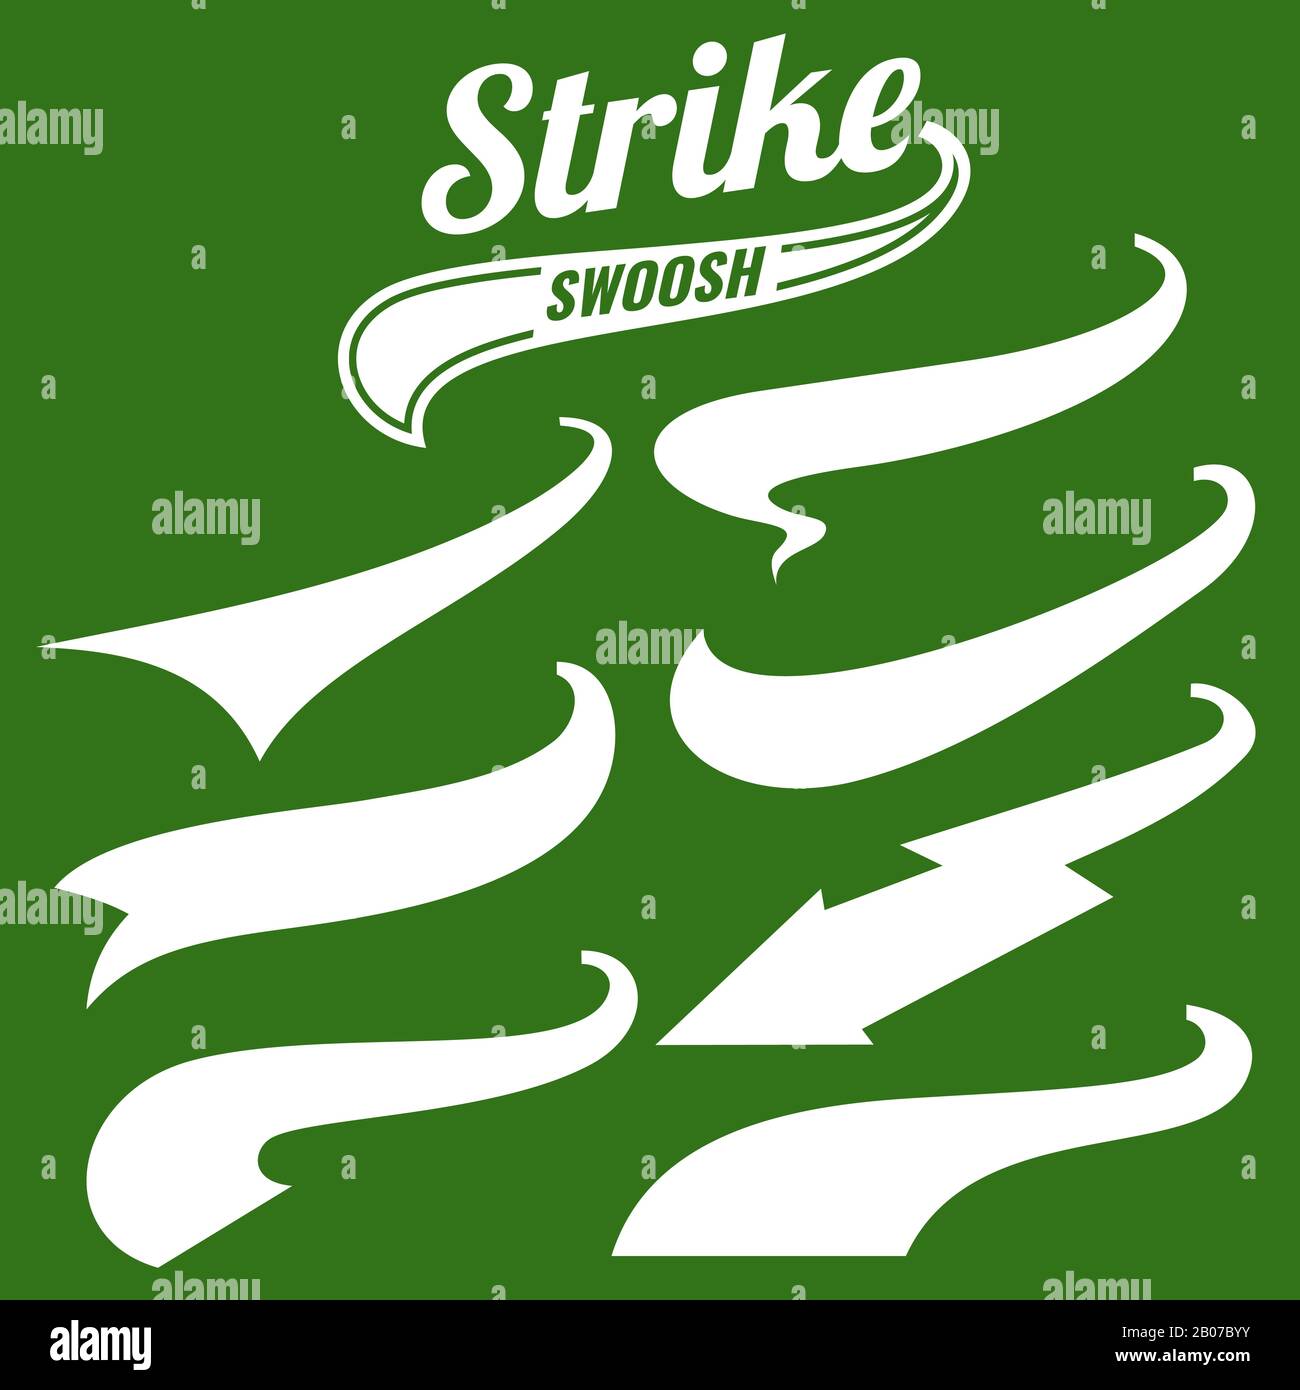 Typographic Swash And Swooshes Tails Retro Swishes And Swashes For Athletic  Typography Logos Baseball Font Vector Illustration Stock Illustration -  Download Image Now - iStock